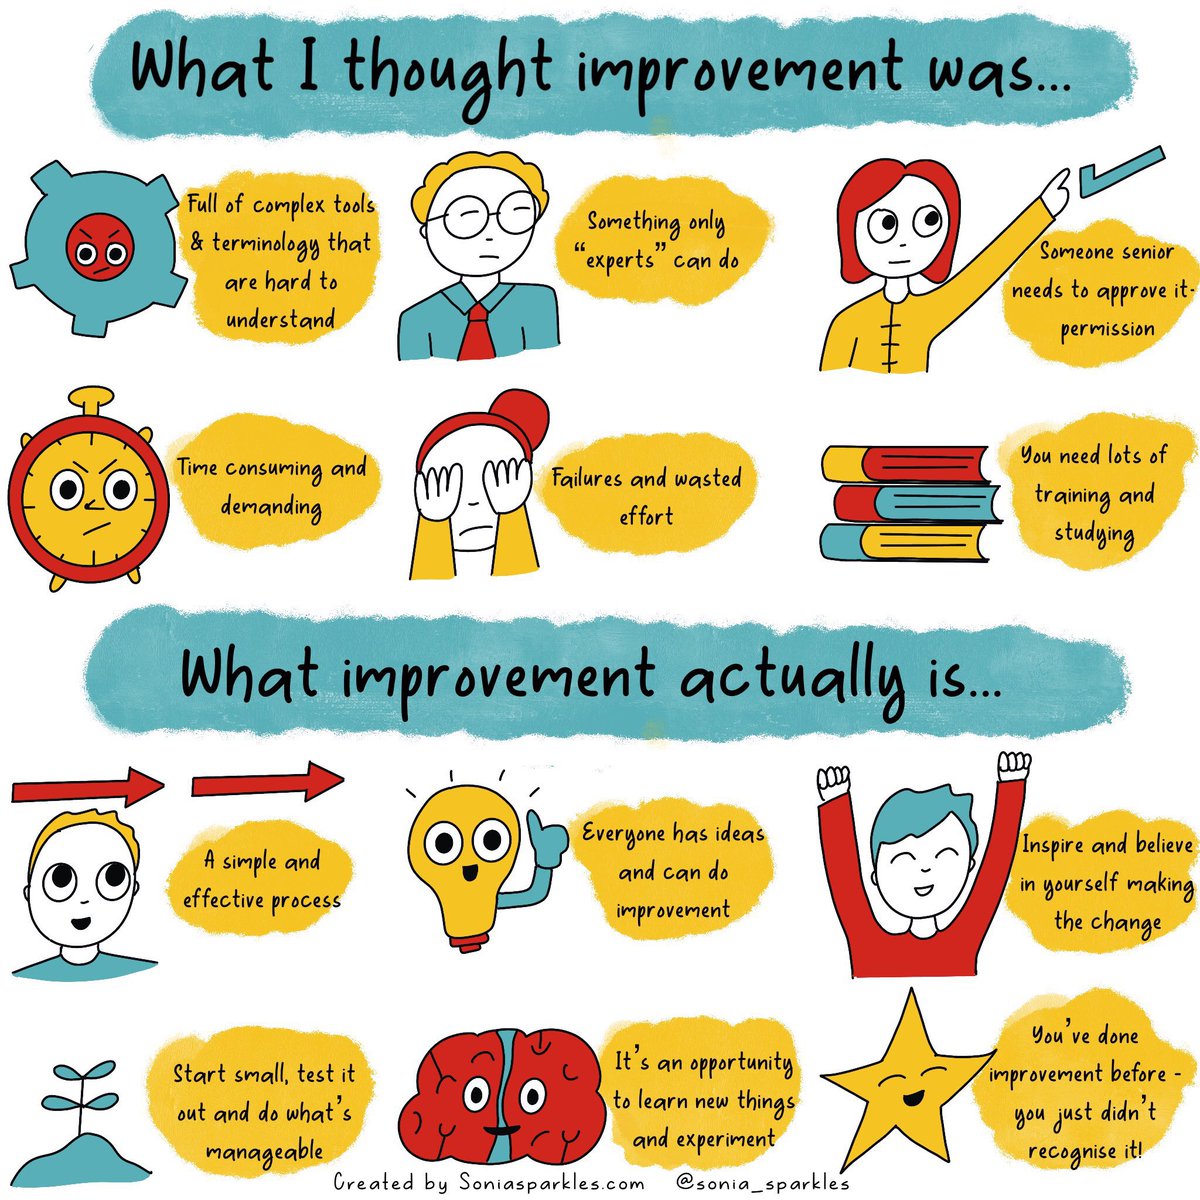 Improvement is for everyone at all levels across all roles We can all do it & thrive on your ideas It’s not just for senior people. They often aren’t the ones with the ideas It doesn’t have to be complex, fancy or over complicated The best improvements start small & simple